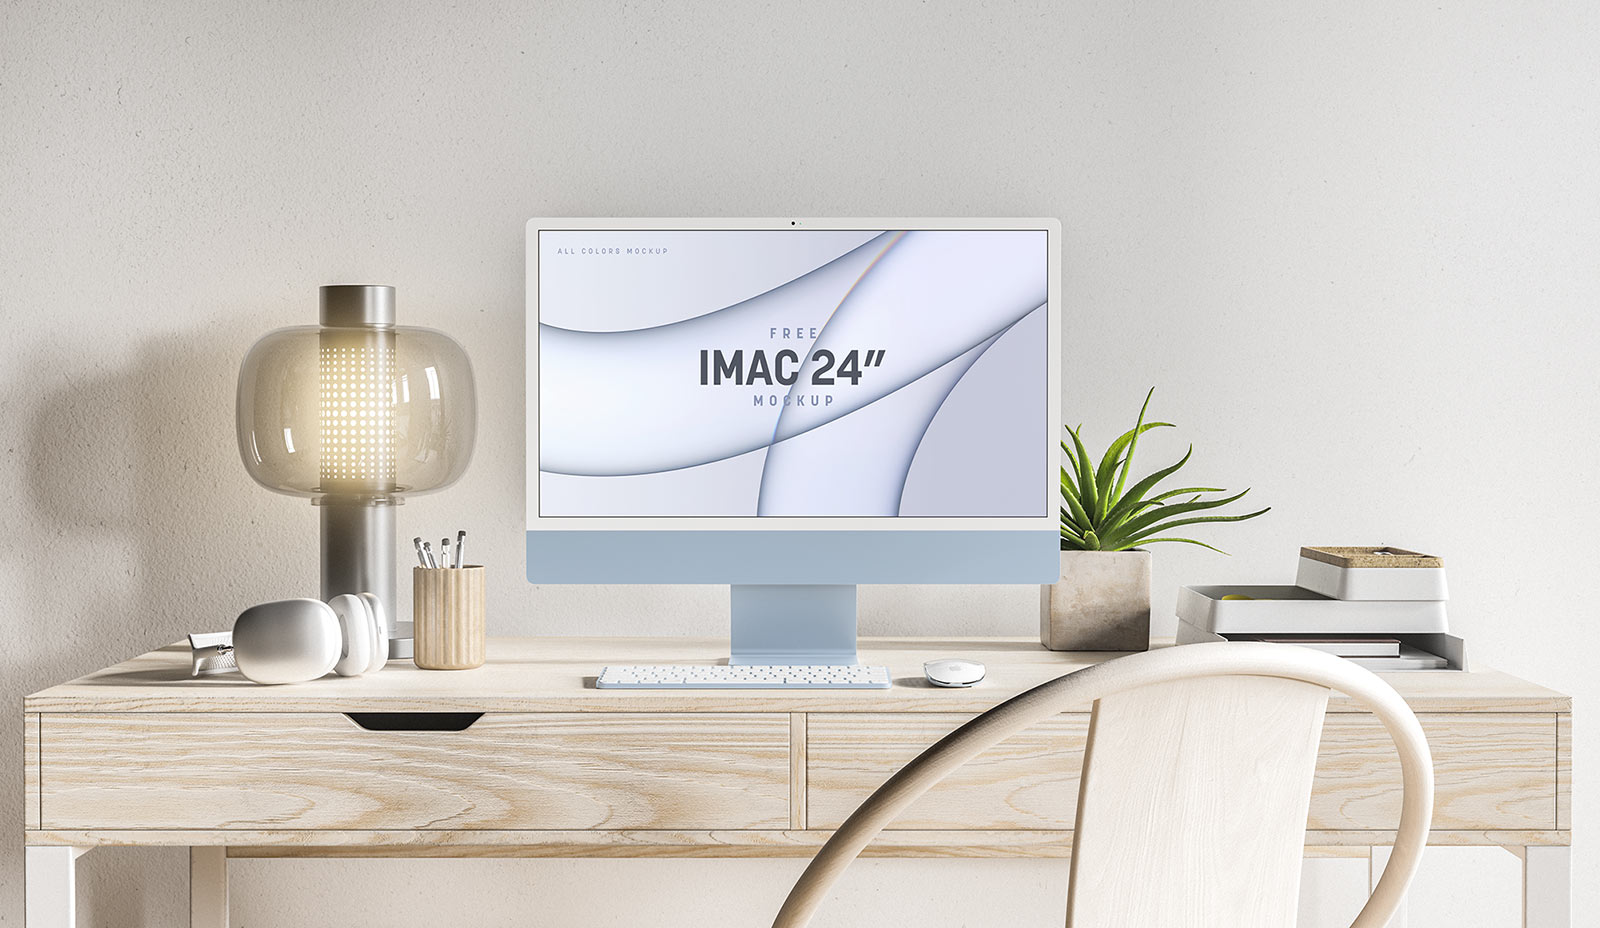 Free-New-iMac-24-Inches-2021-Mockup-PSD-(All-Colors)-2